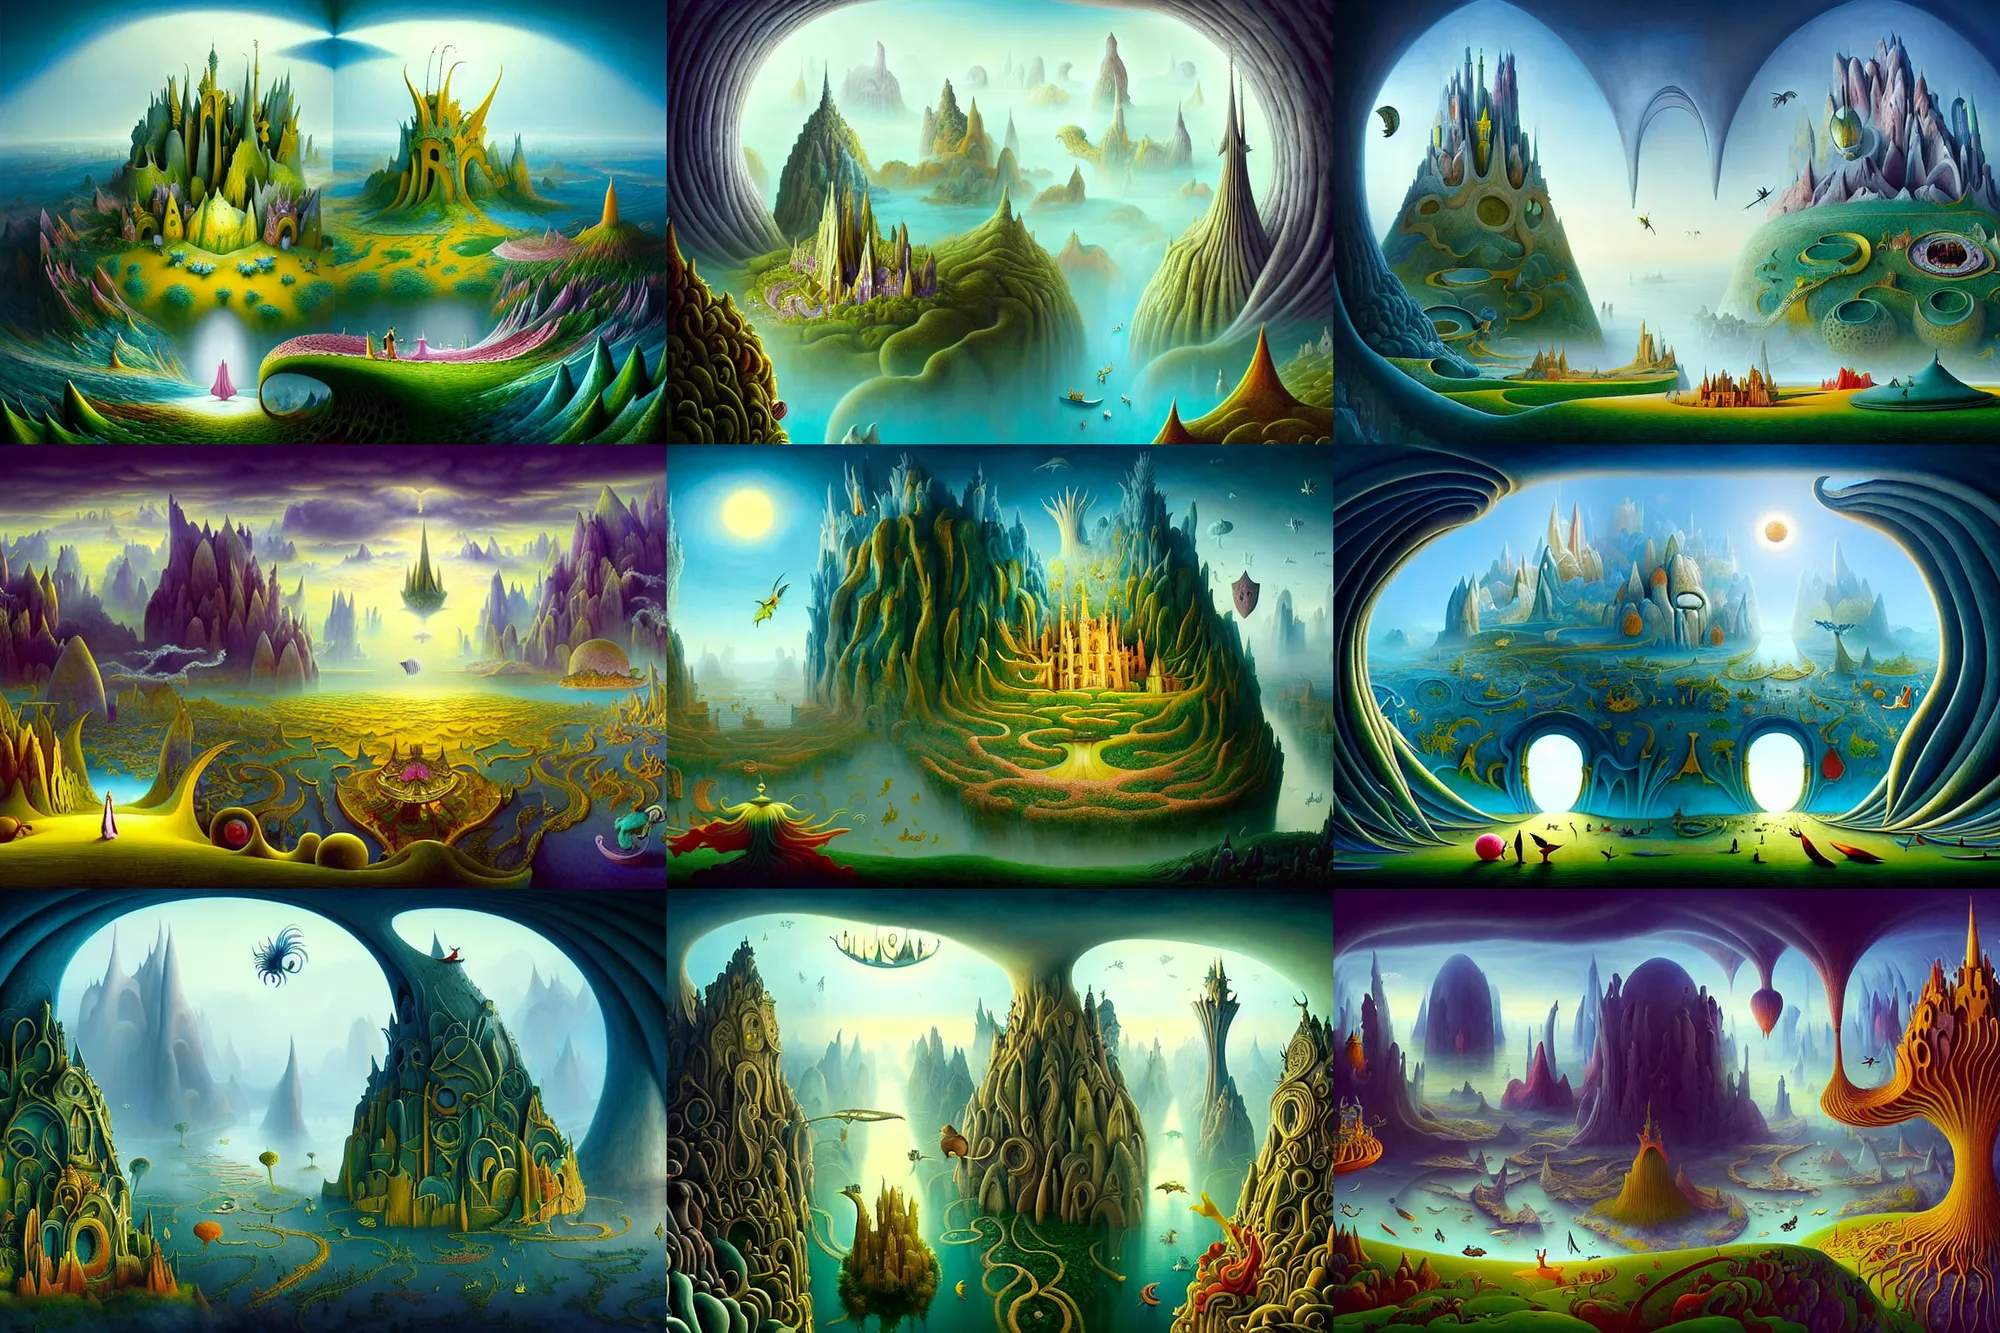 Prompt: a beguiling epic stunning beautiful and insanely detailed matte painting of windows into dream worlds with surreal architecture designed by Heironymous Bosch, dream world populated with mythical whimsical creatures, mega structures inspired by Heironymous Bosch's Garden of Earthly Delights, vast surreal landscape and horizon by Cyril Rolando and Paul Lehr and Andrew Ferez, masterpiece!!!, grand!, imaginative!!!, whimsical!!, epic scale, intricate details, sense of awe, elite, wonder, insanely complex, masterful composition!!!, sharp focus, fantasy realism, dramatic lighting